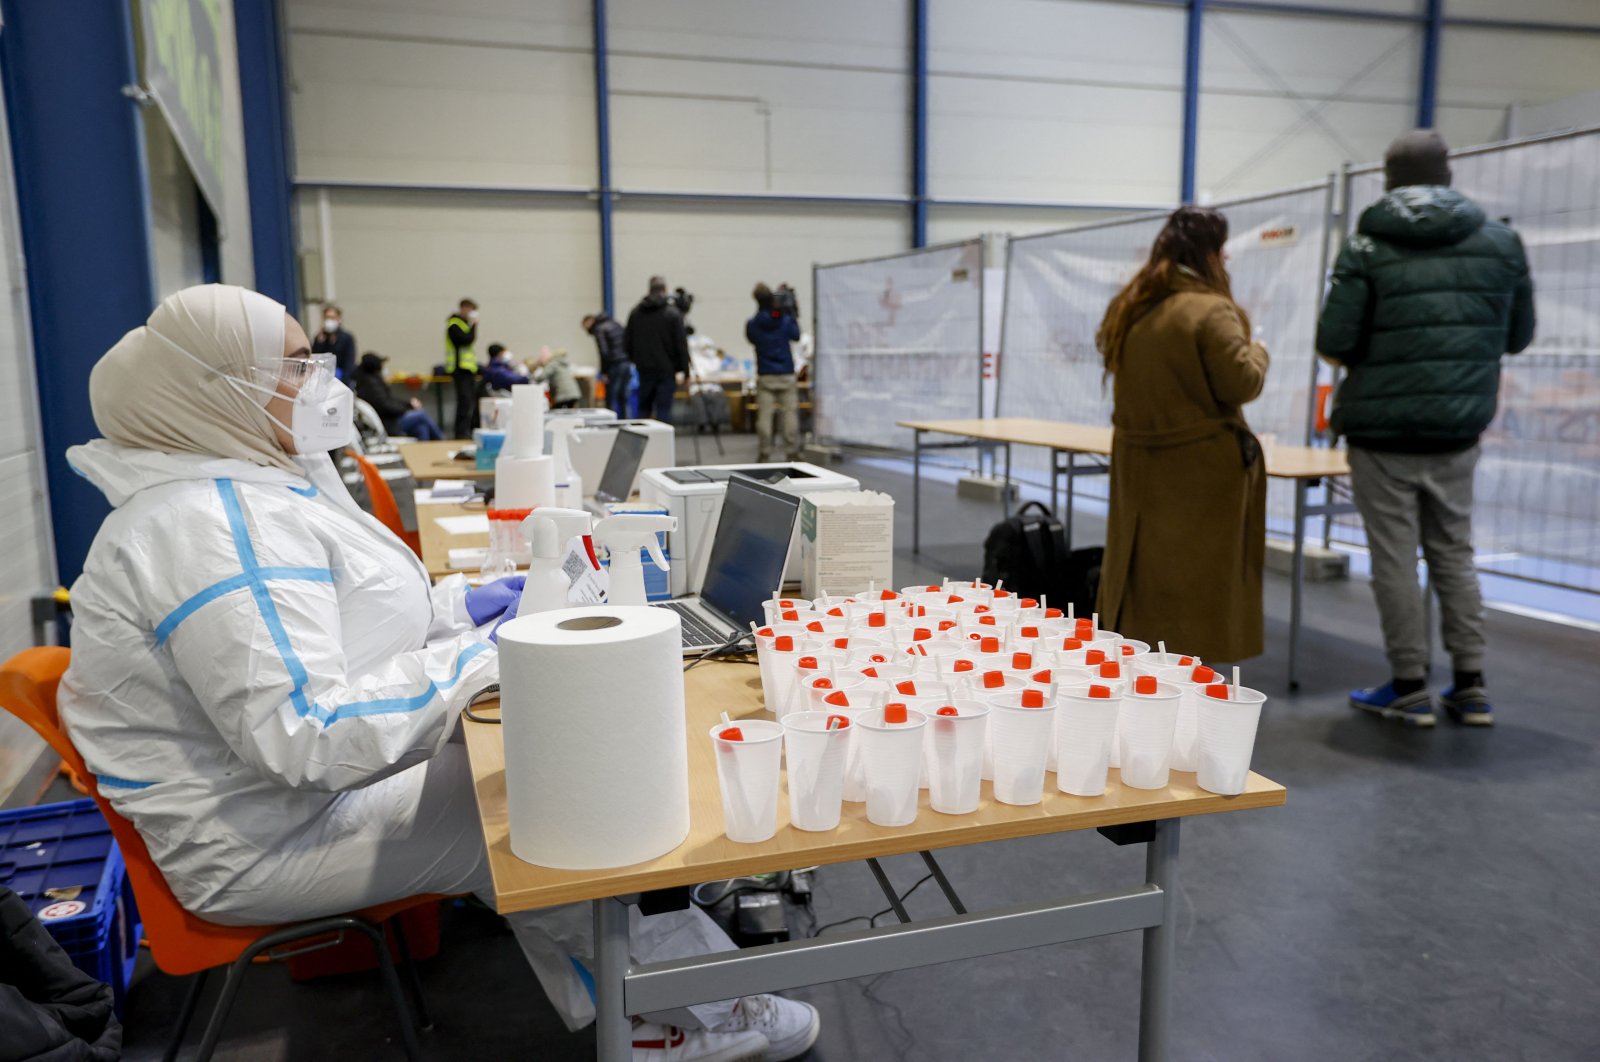 Ukrainian refugees are being tested for the coronavirus at a reception center in Vienna, Austria, March 4, 2022. (AFP Photo)